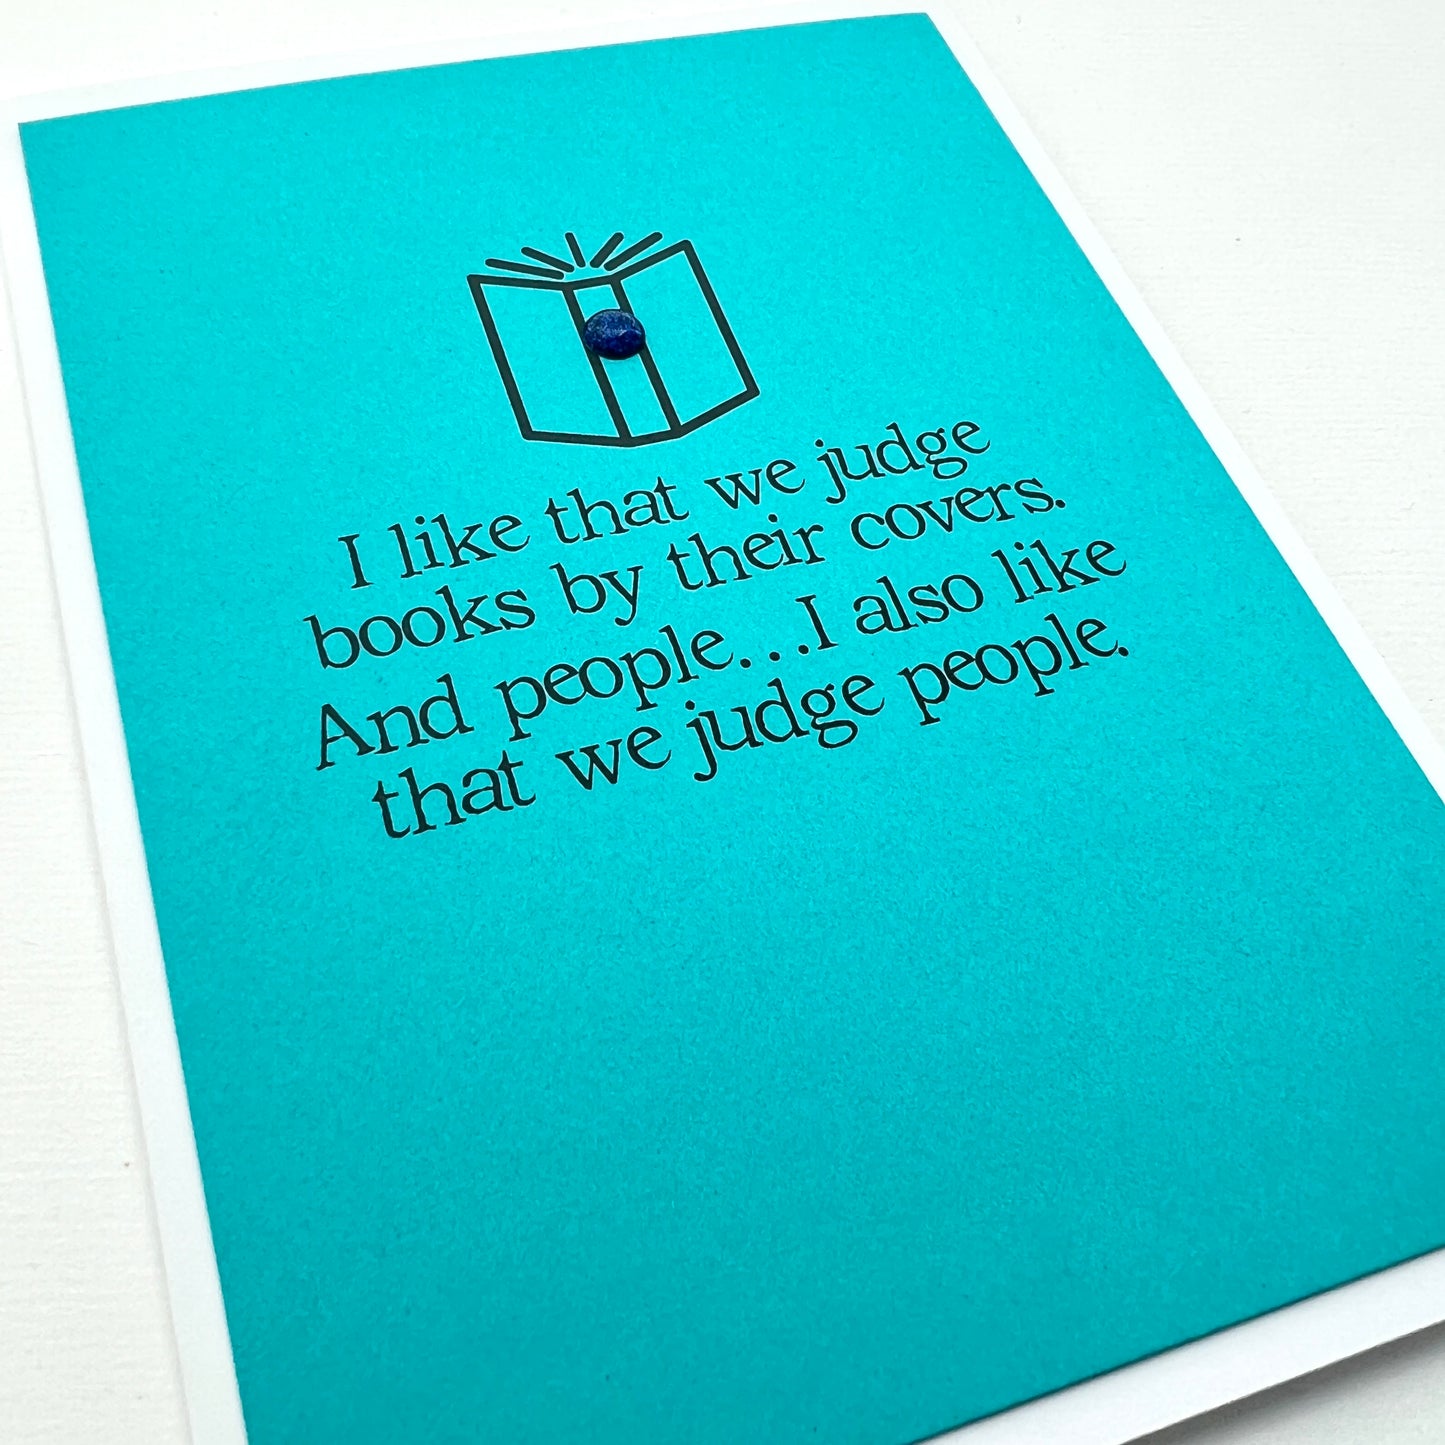 Judge Books and People card